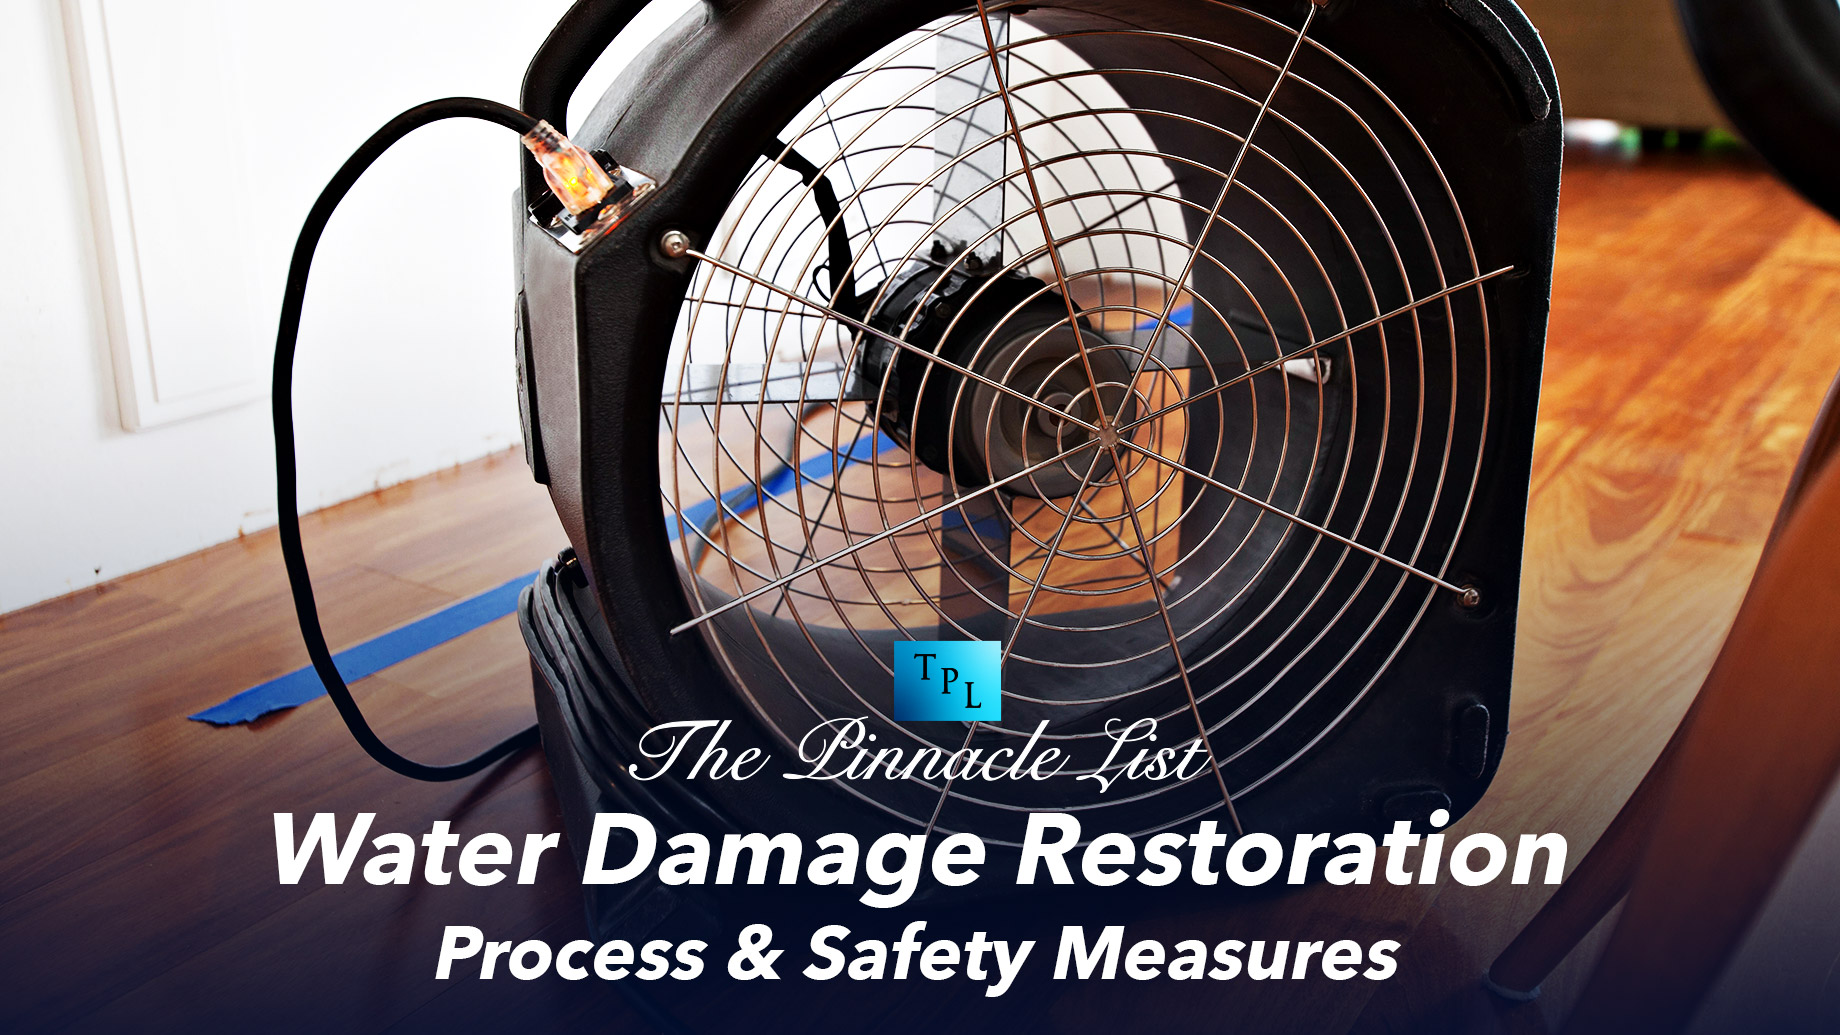 Water Damage Restoration: Process And Safety Measures